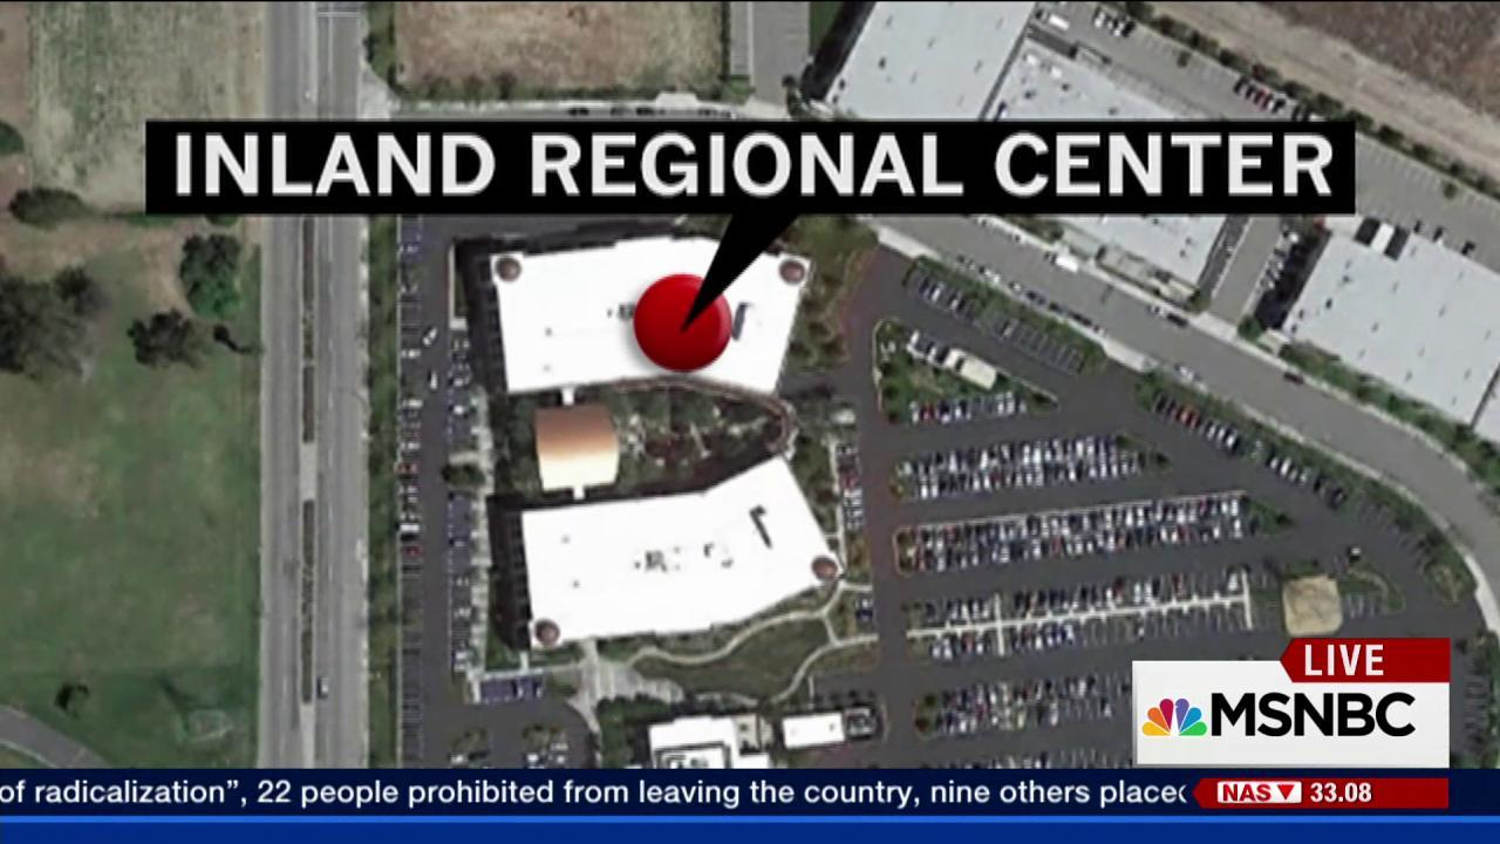 What we know about the San Bernardino shooting